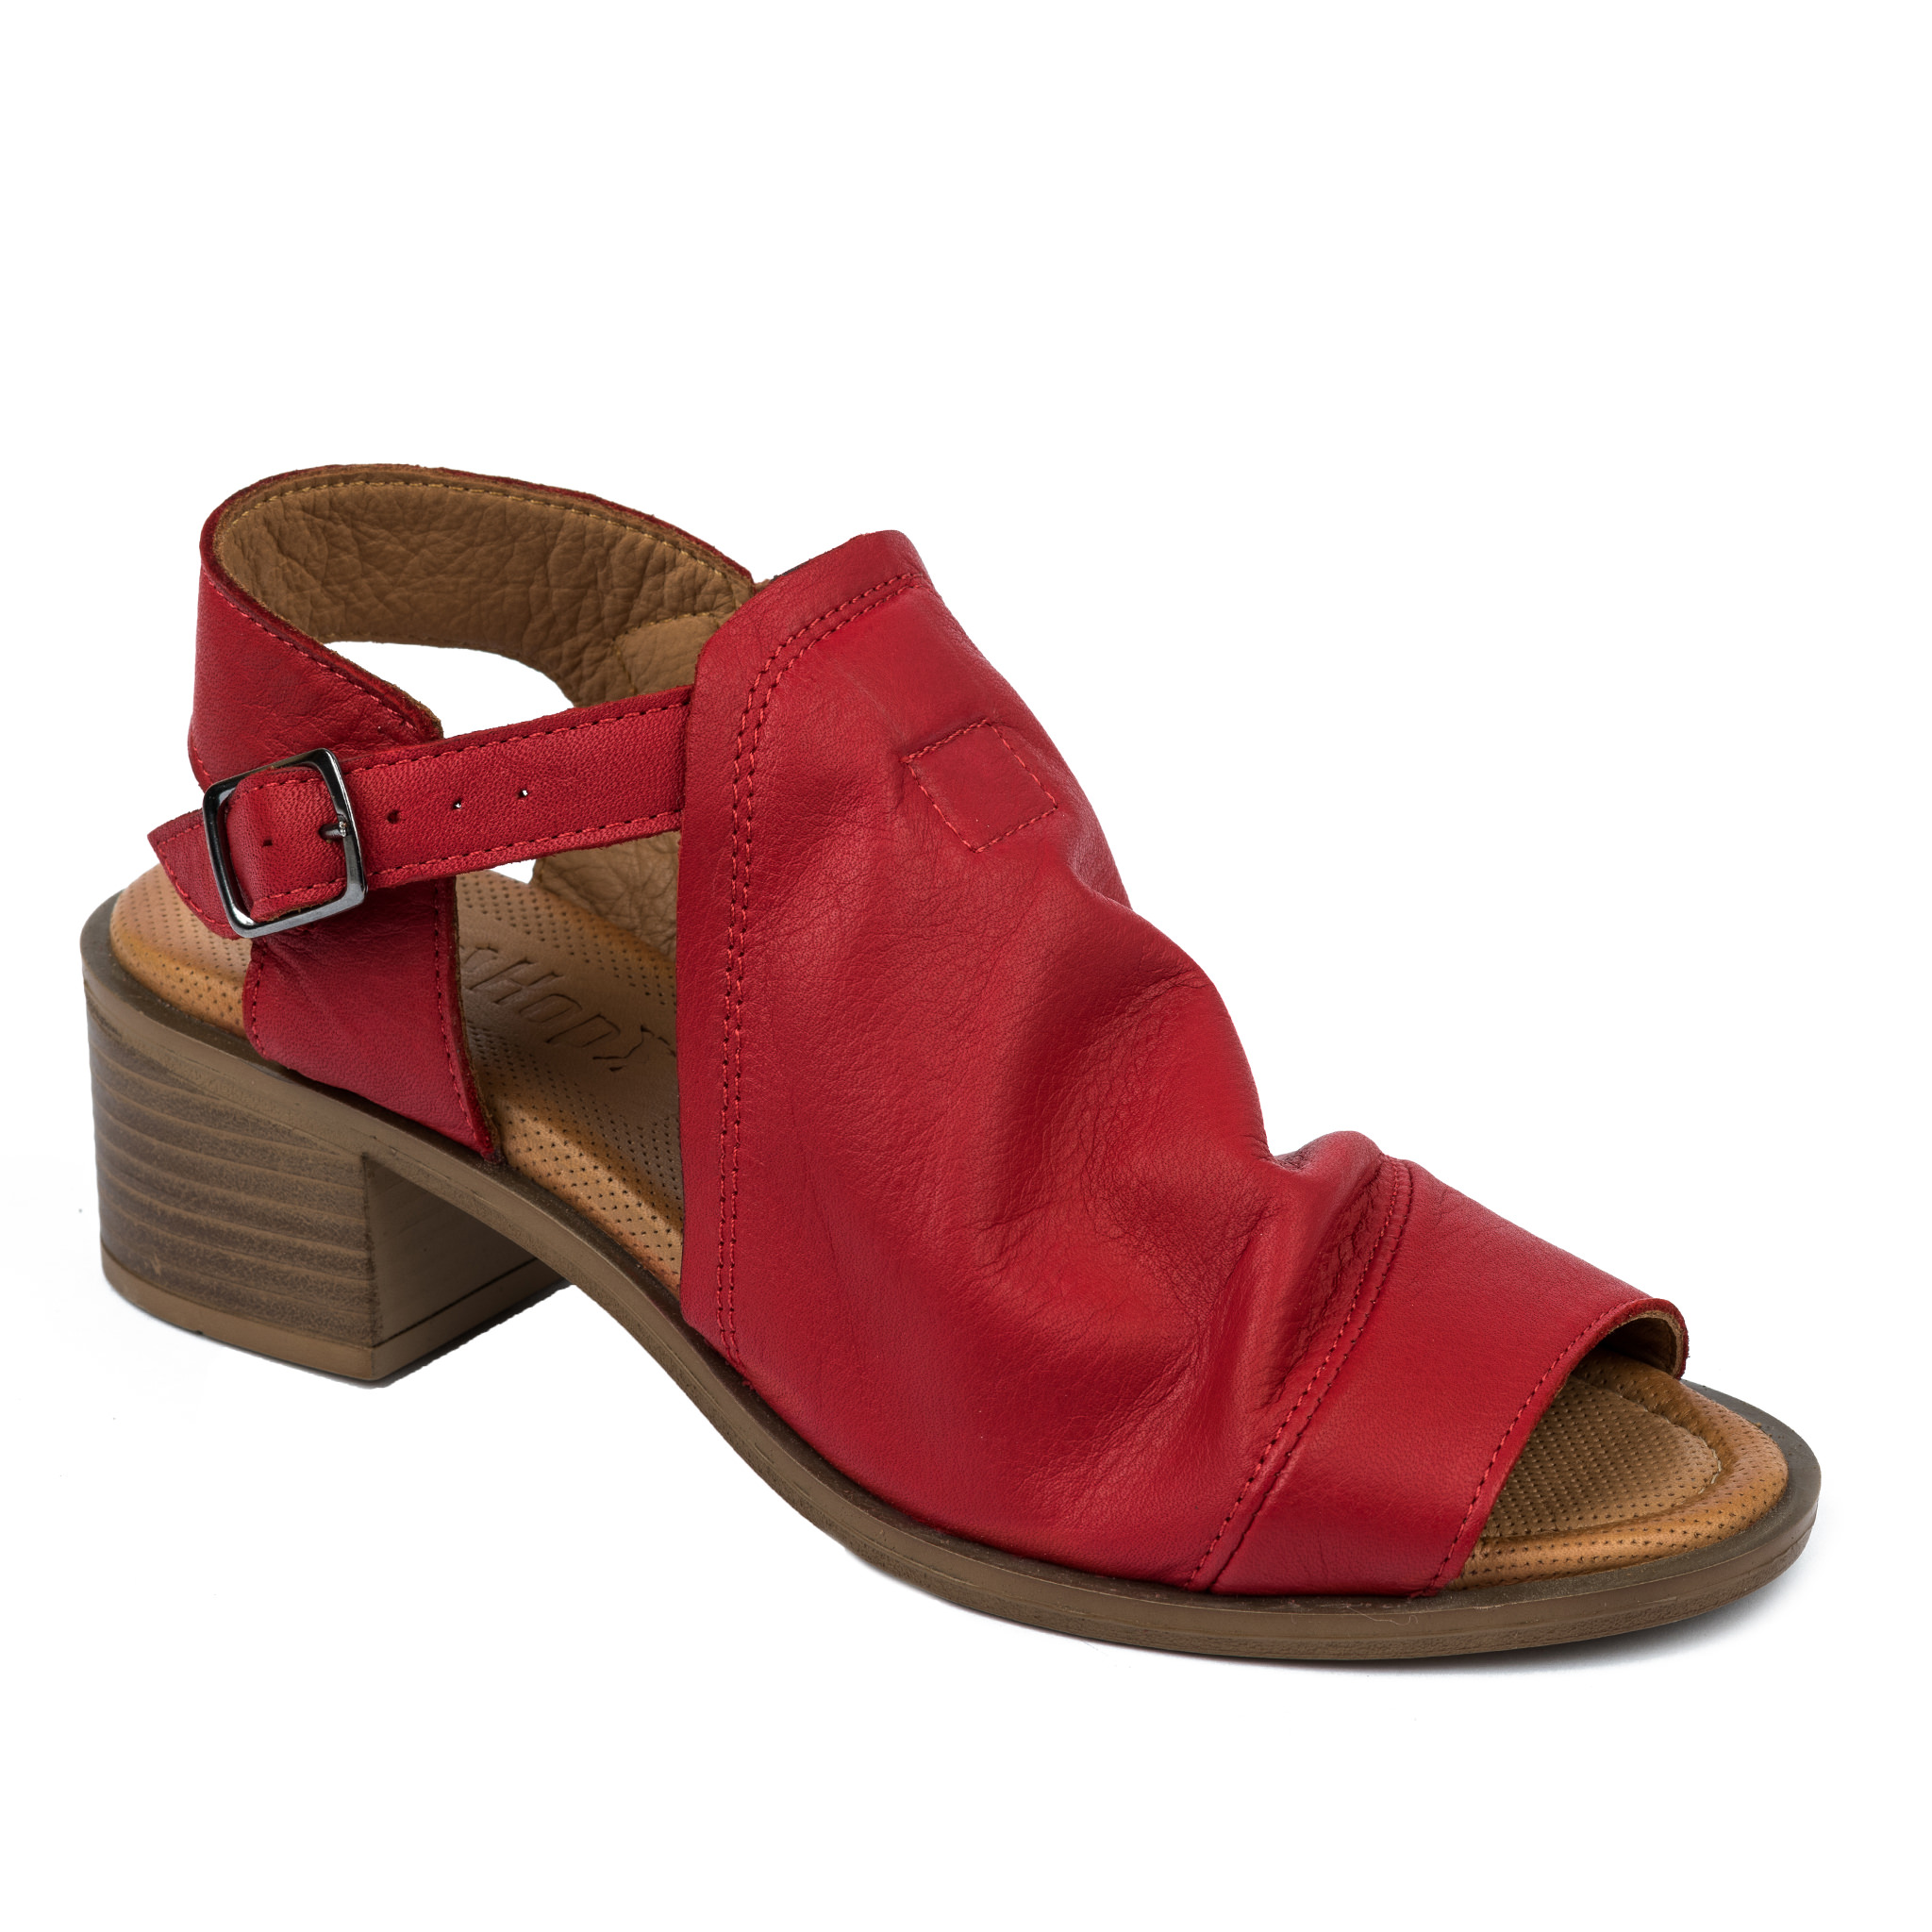 Leather sandals A673 - RED